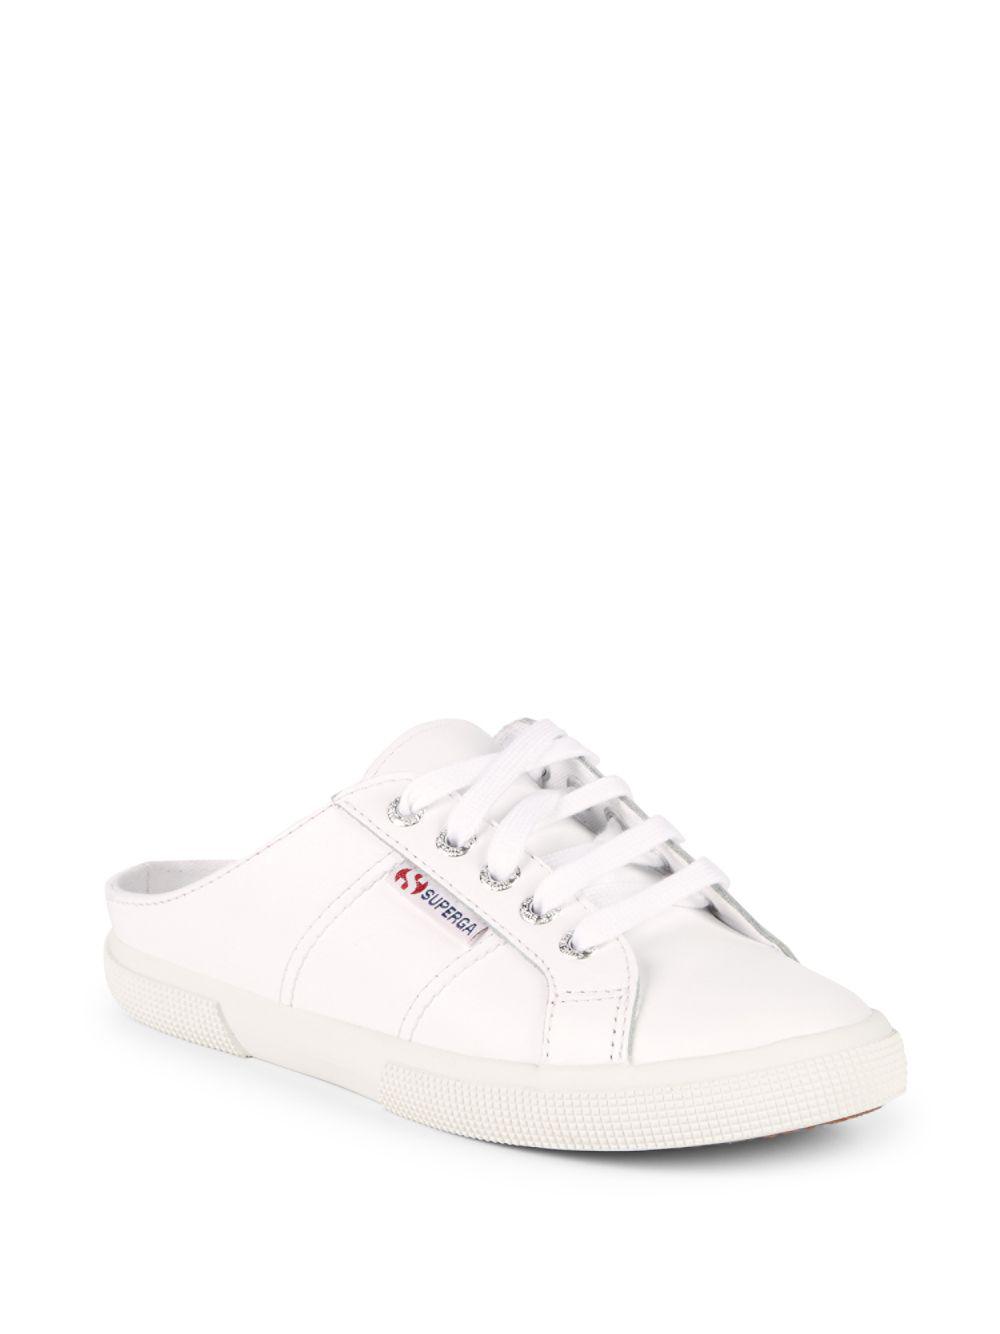 Superga Leather Backless Sneakers White - Lyst